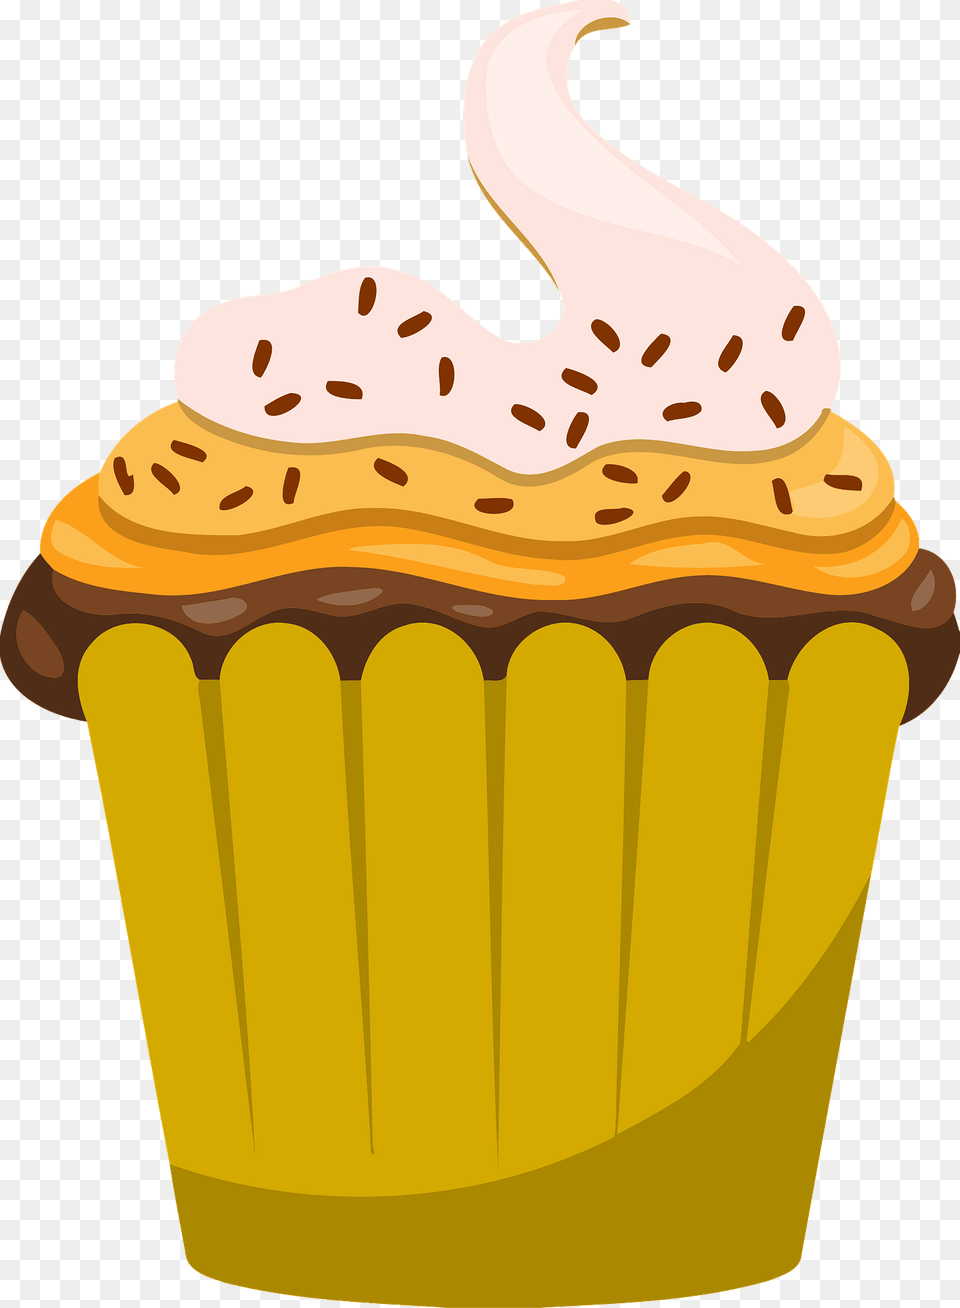 Cupcake With White Yellow And Chocolate Frosting Layers Clipart, Cake, Icing, Food, Dessert Free Png Download